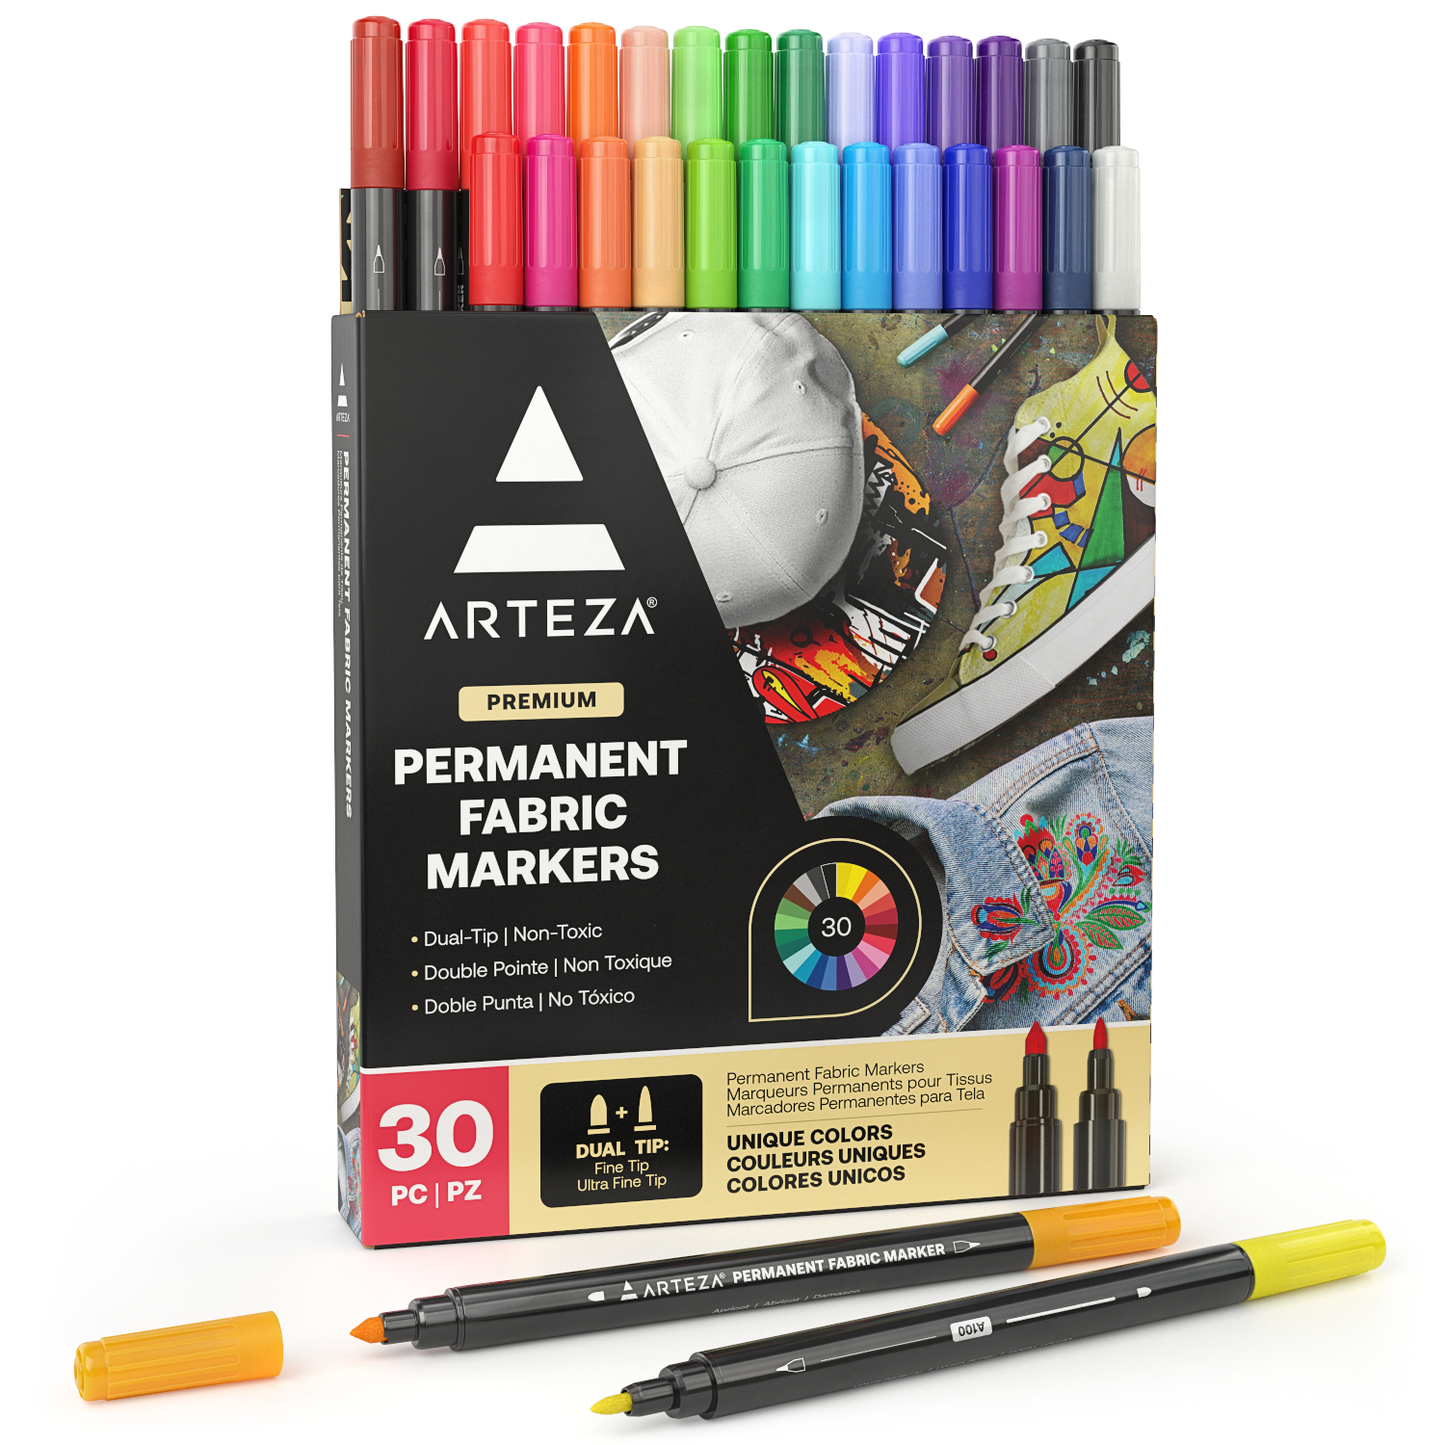 Lelix Fabric Markers, 30 Permanent Colors Dual Tip Fabric Pens for